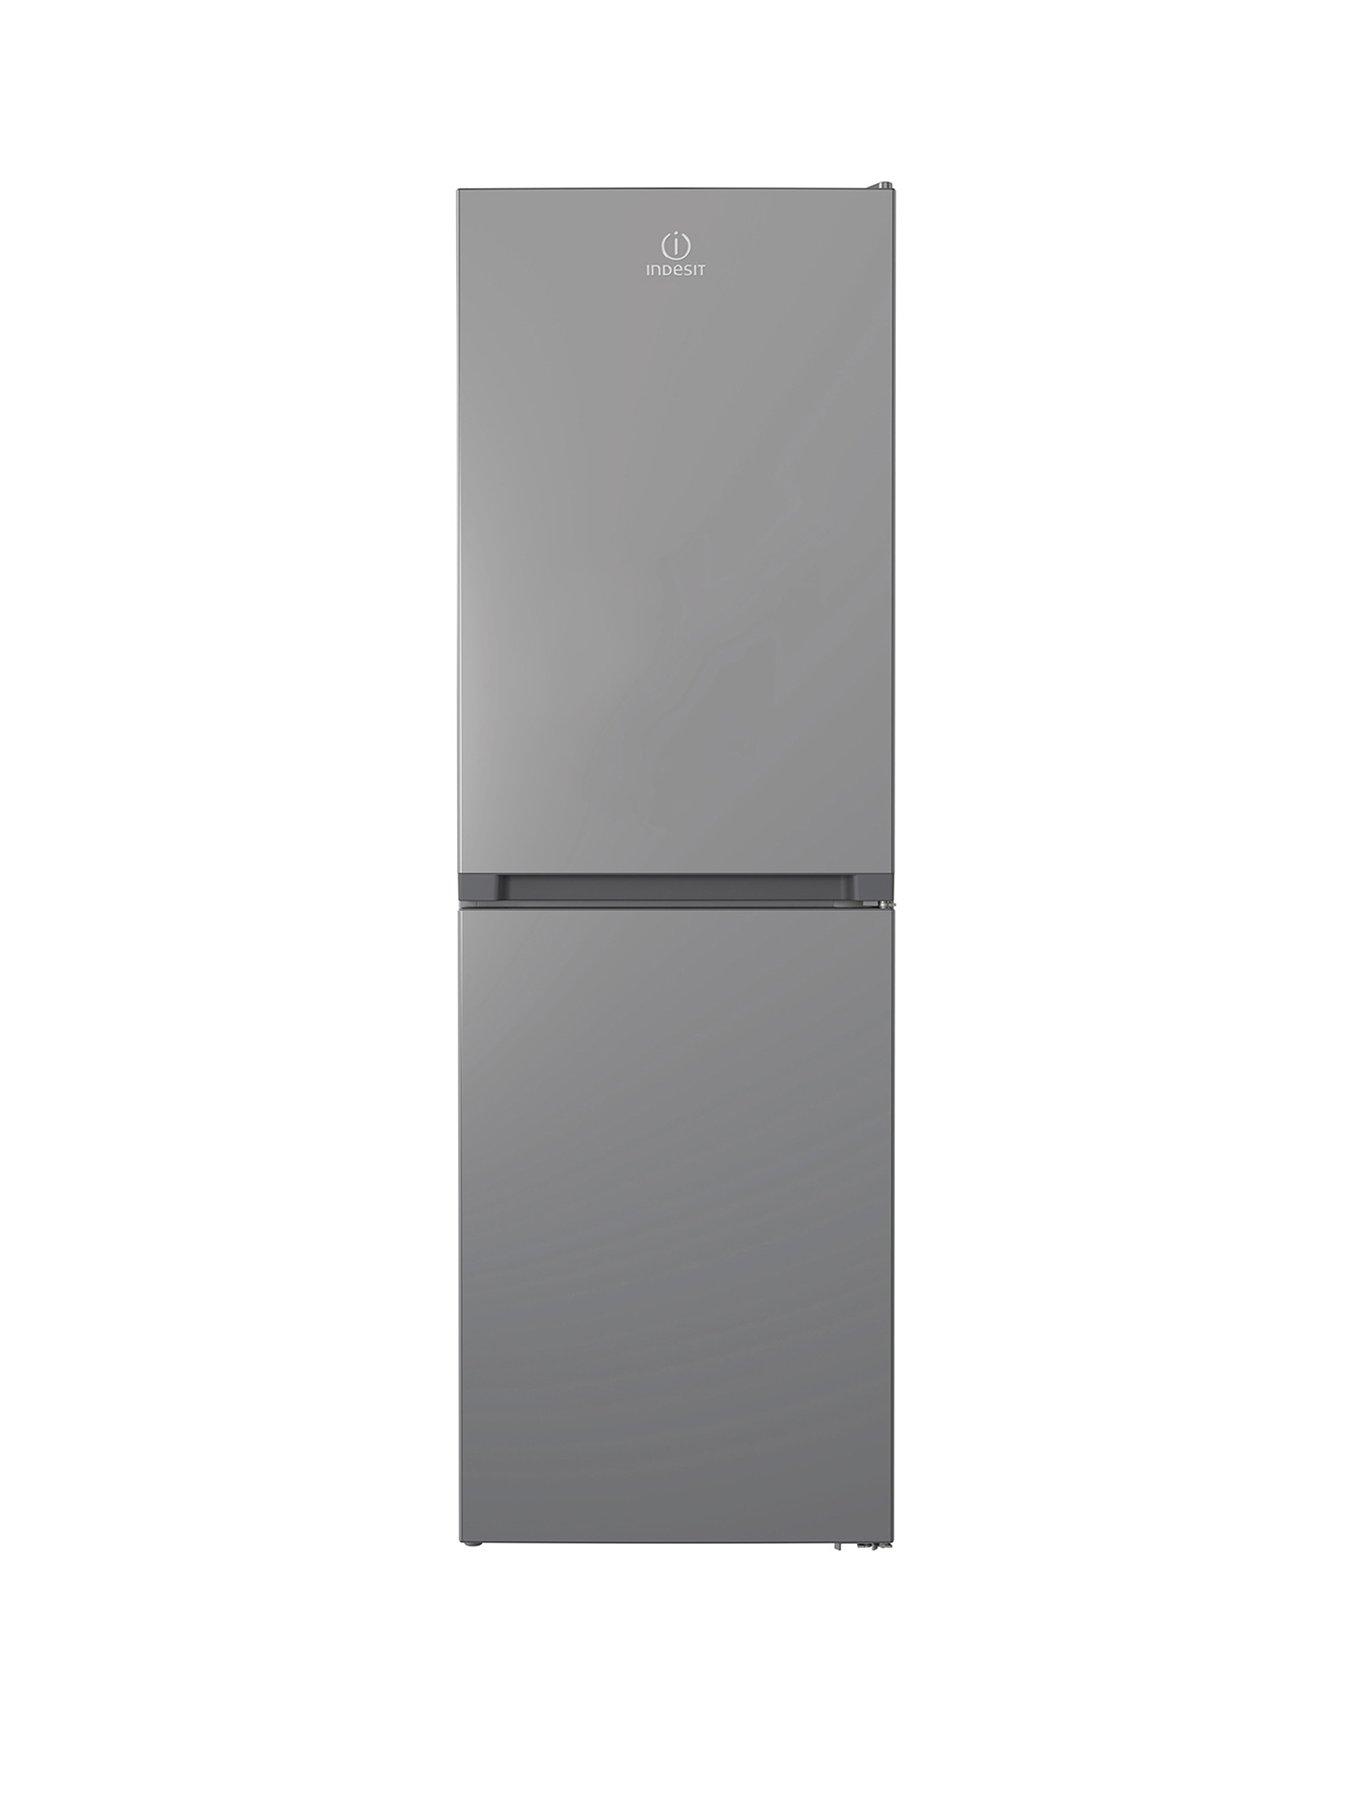 Indesit Total No Frost Ibtnf60182S Fridge Freezer - Silver